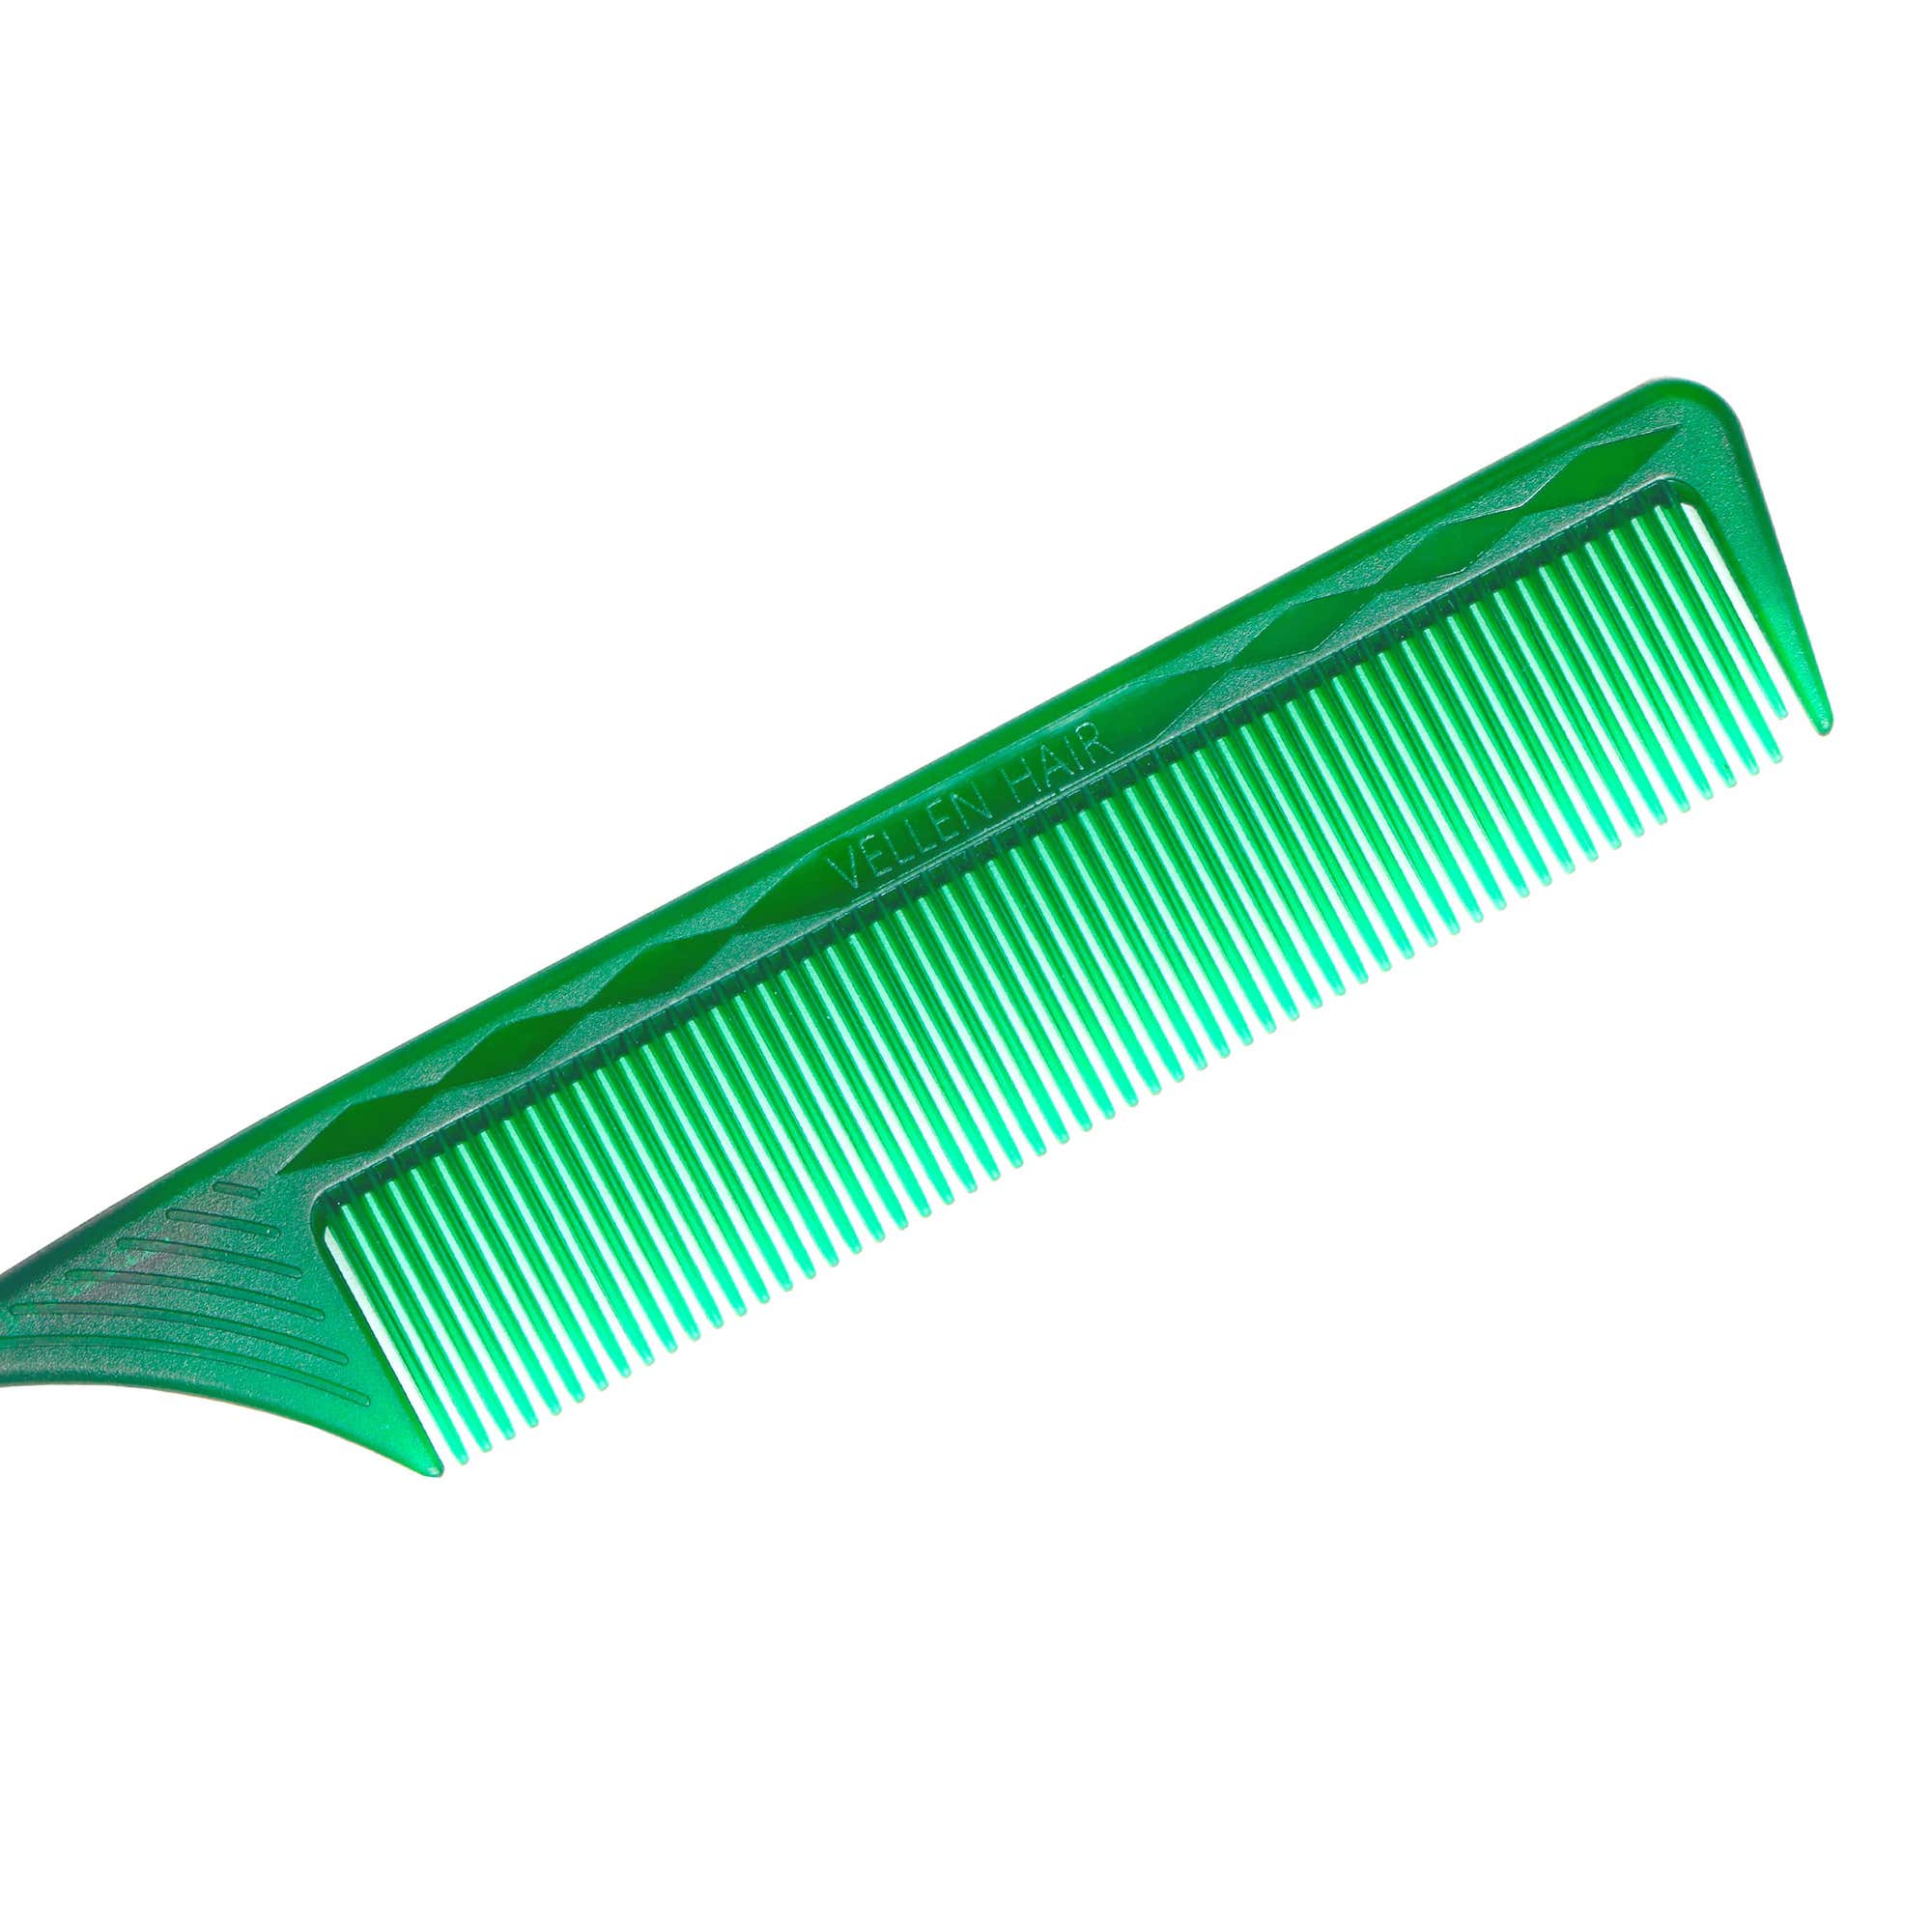 VELLEN HAIR® ULTIMATE PIN TAIL COMBS 3 PACK - GREEN TRANSPARENT